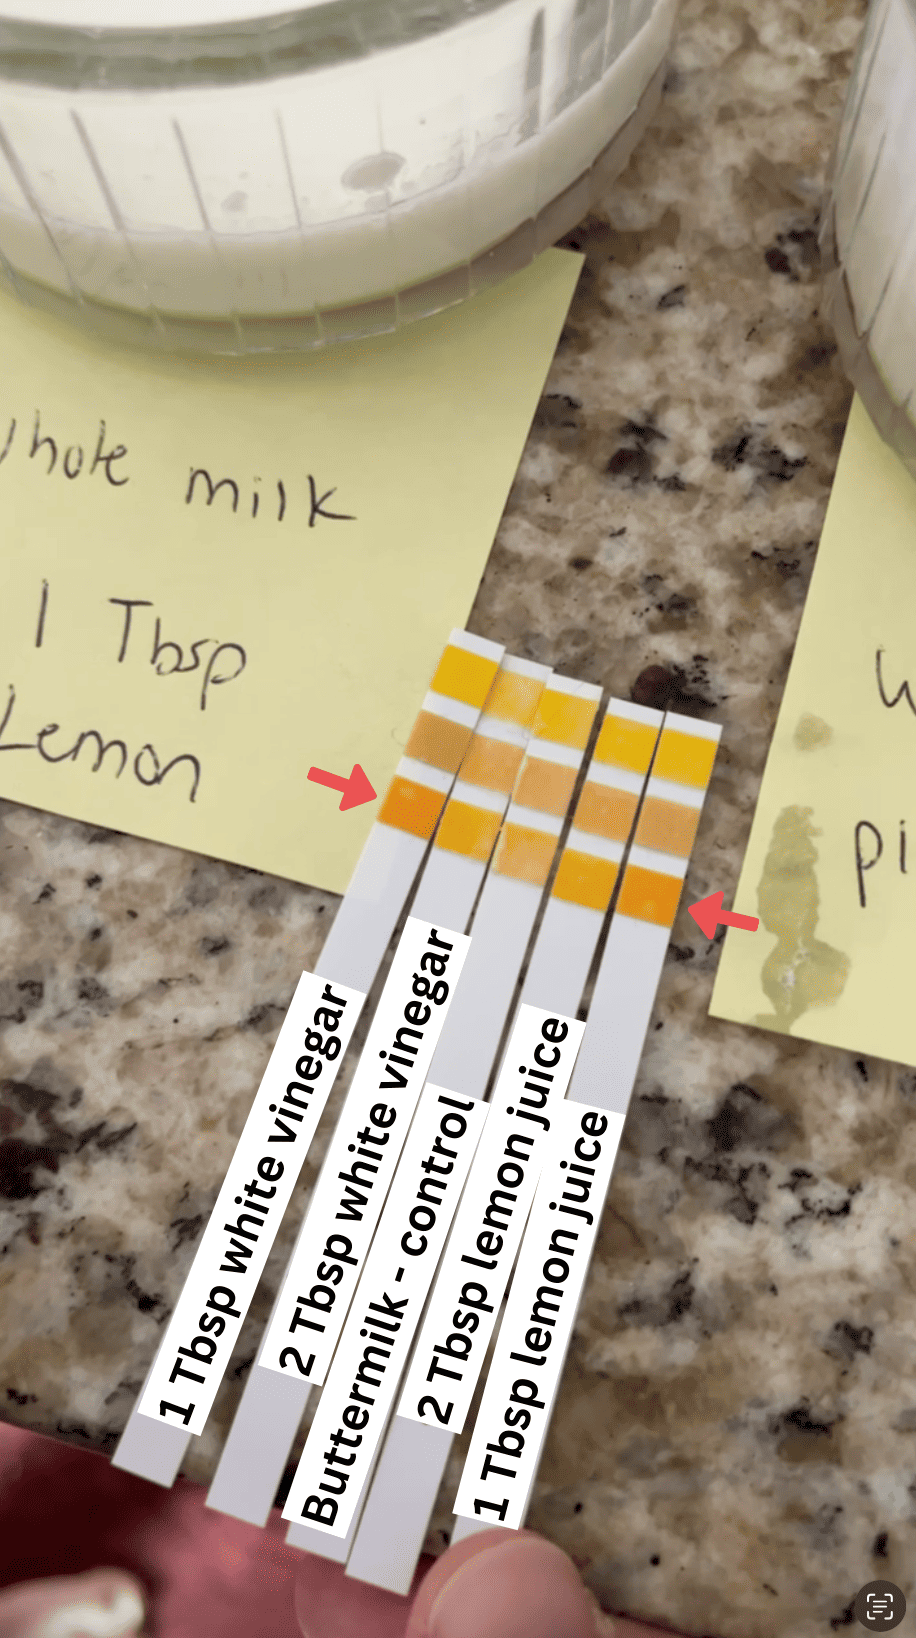 pH testing strips on a counter top beside yellow sticky notes and class containers of buttermilk, with the strips labeled: "1 tbsp white vinegar", "2 tbsp white vinegar", "buttermilk - control", "2 tbsp lemon juice", "1 tbsp lemon juice"